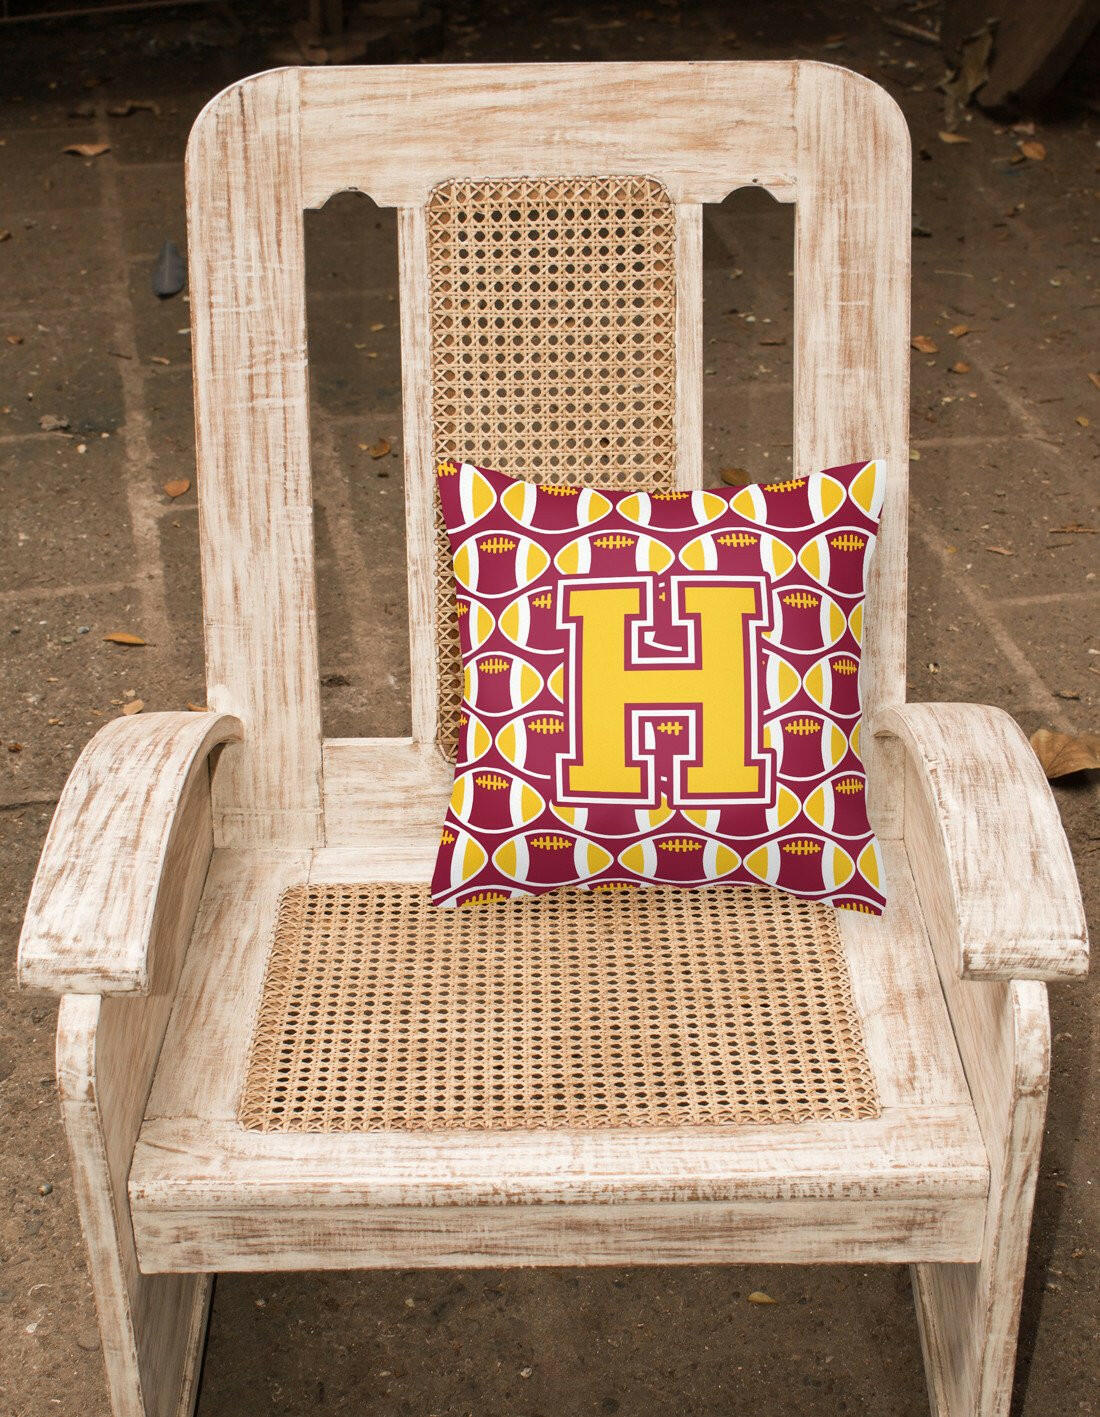 Letter H Football Maroon and Gold Fabric Decorative Pillow CJ1081-HPW1414 by Caroline's Treasures